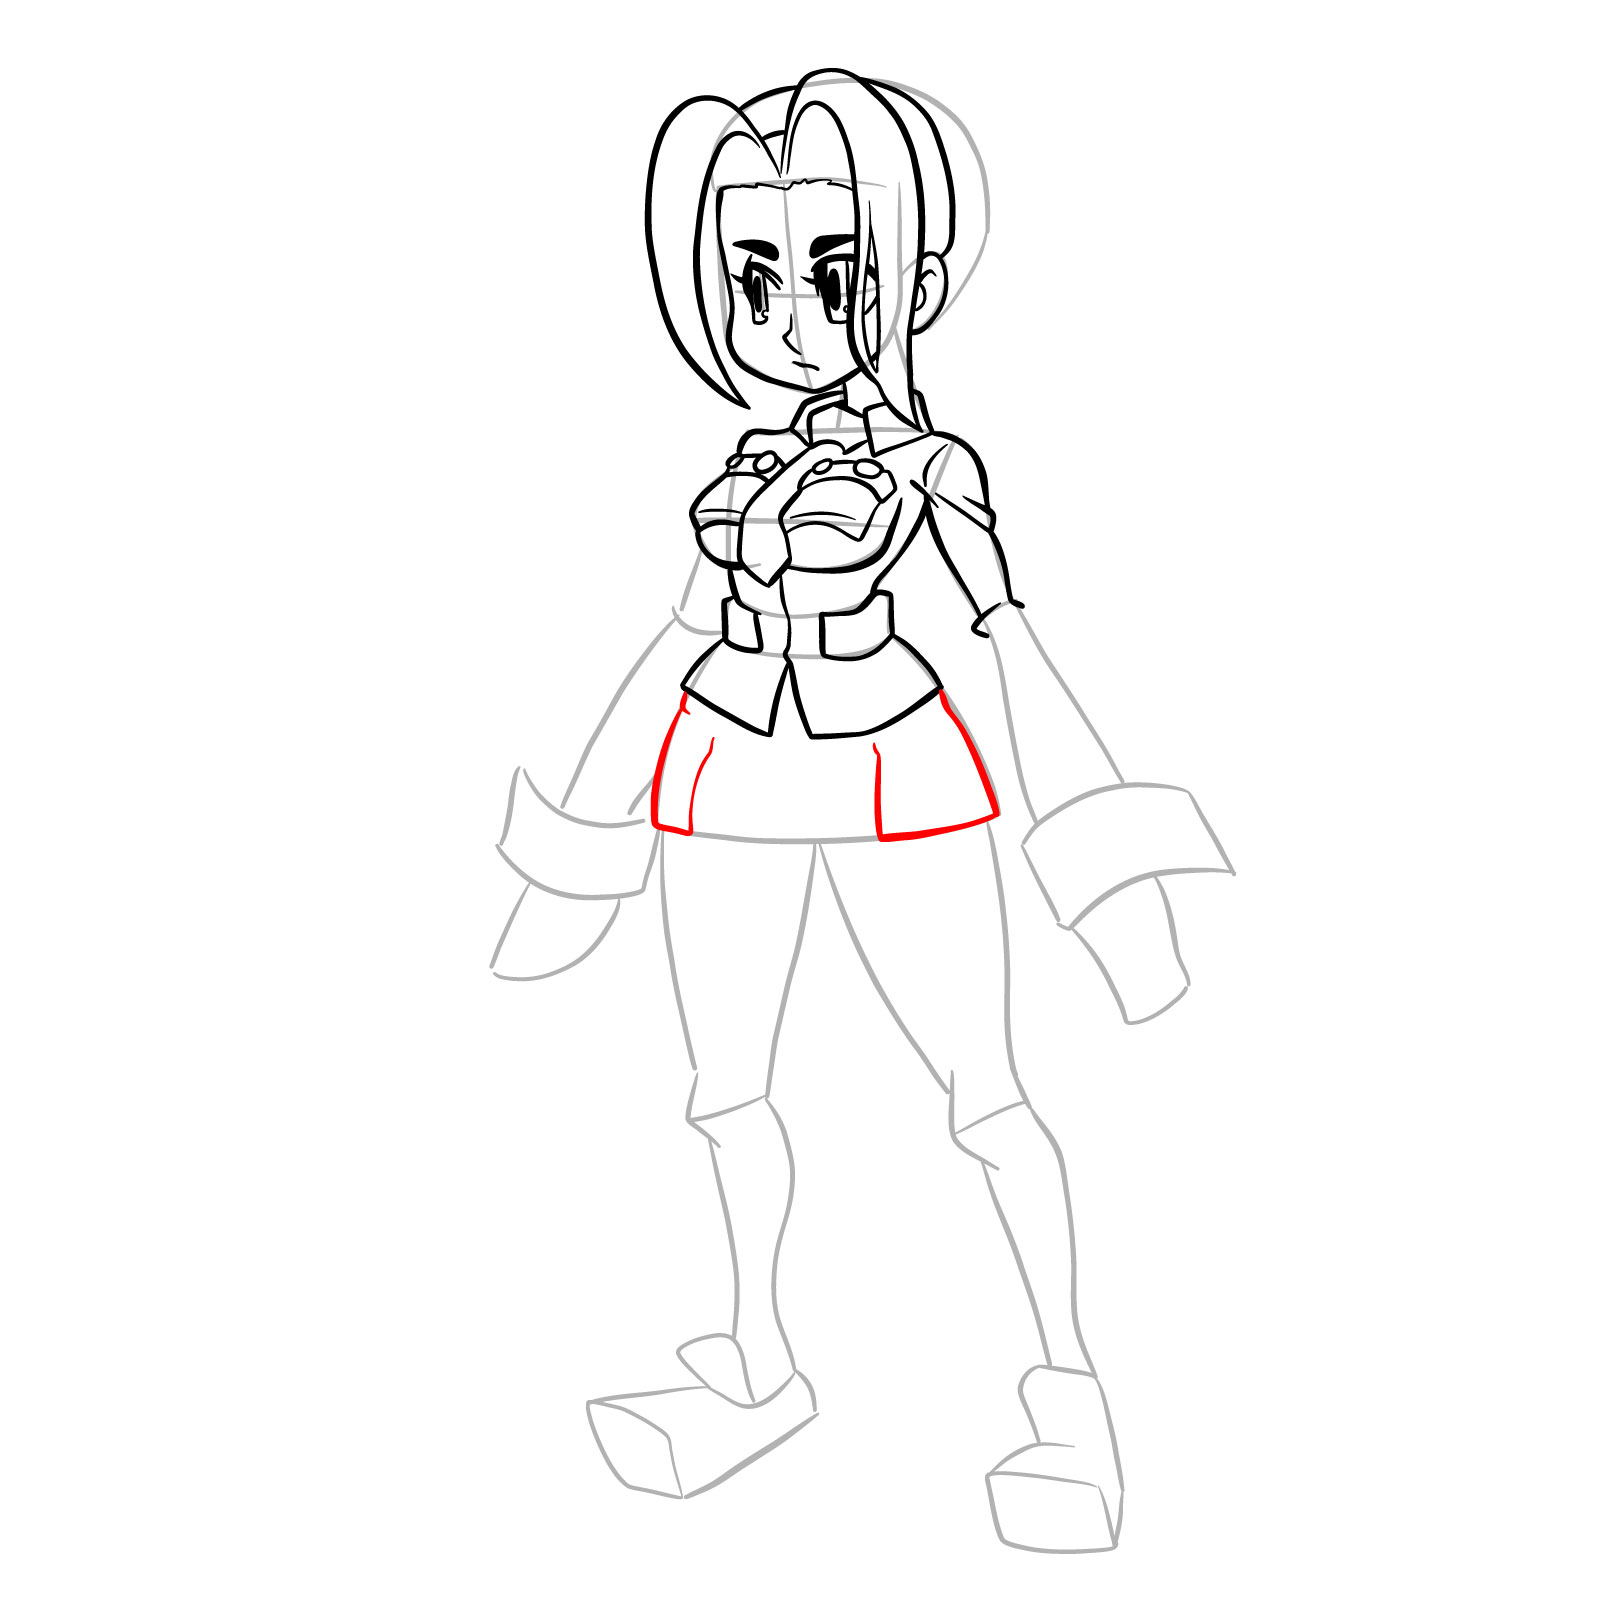 How to draw Filia from Skullgirls - step 23